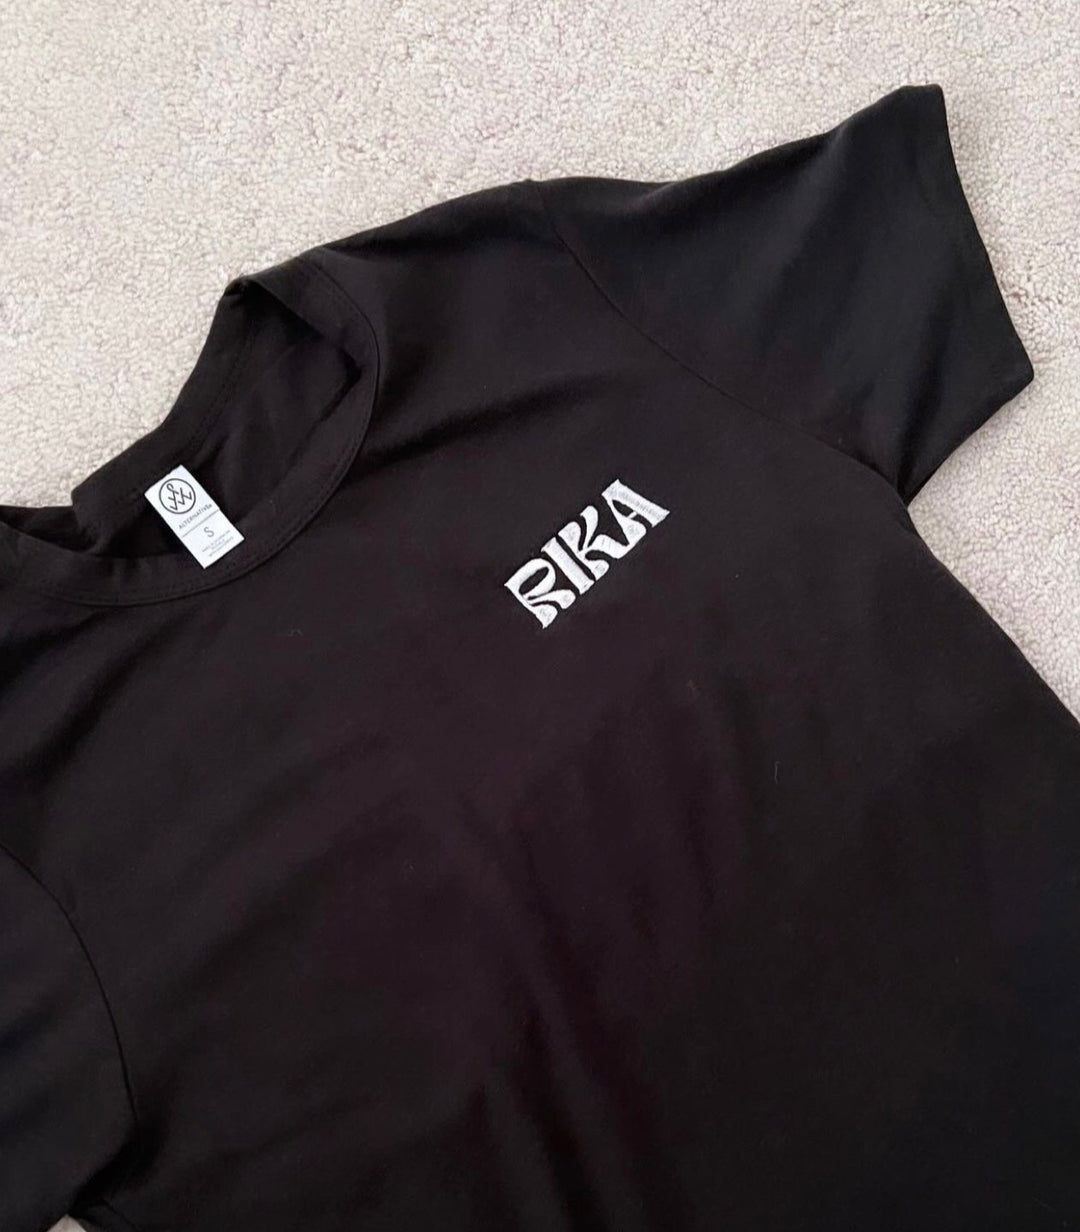 FREE RIKA Tee (discount applies at checkout)